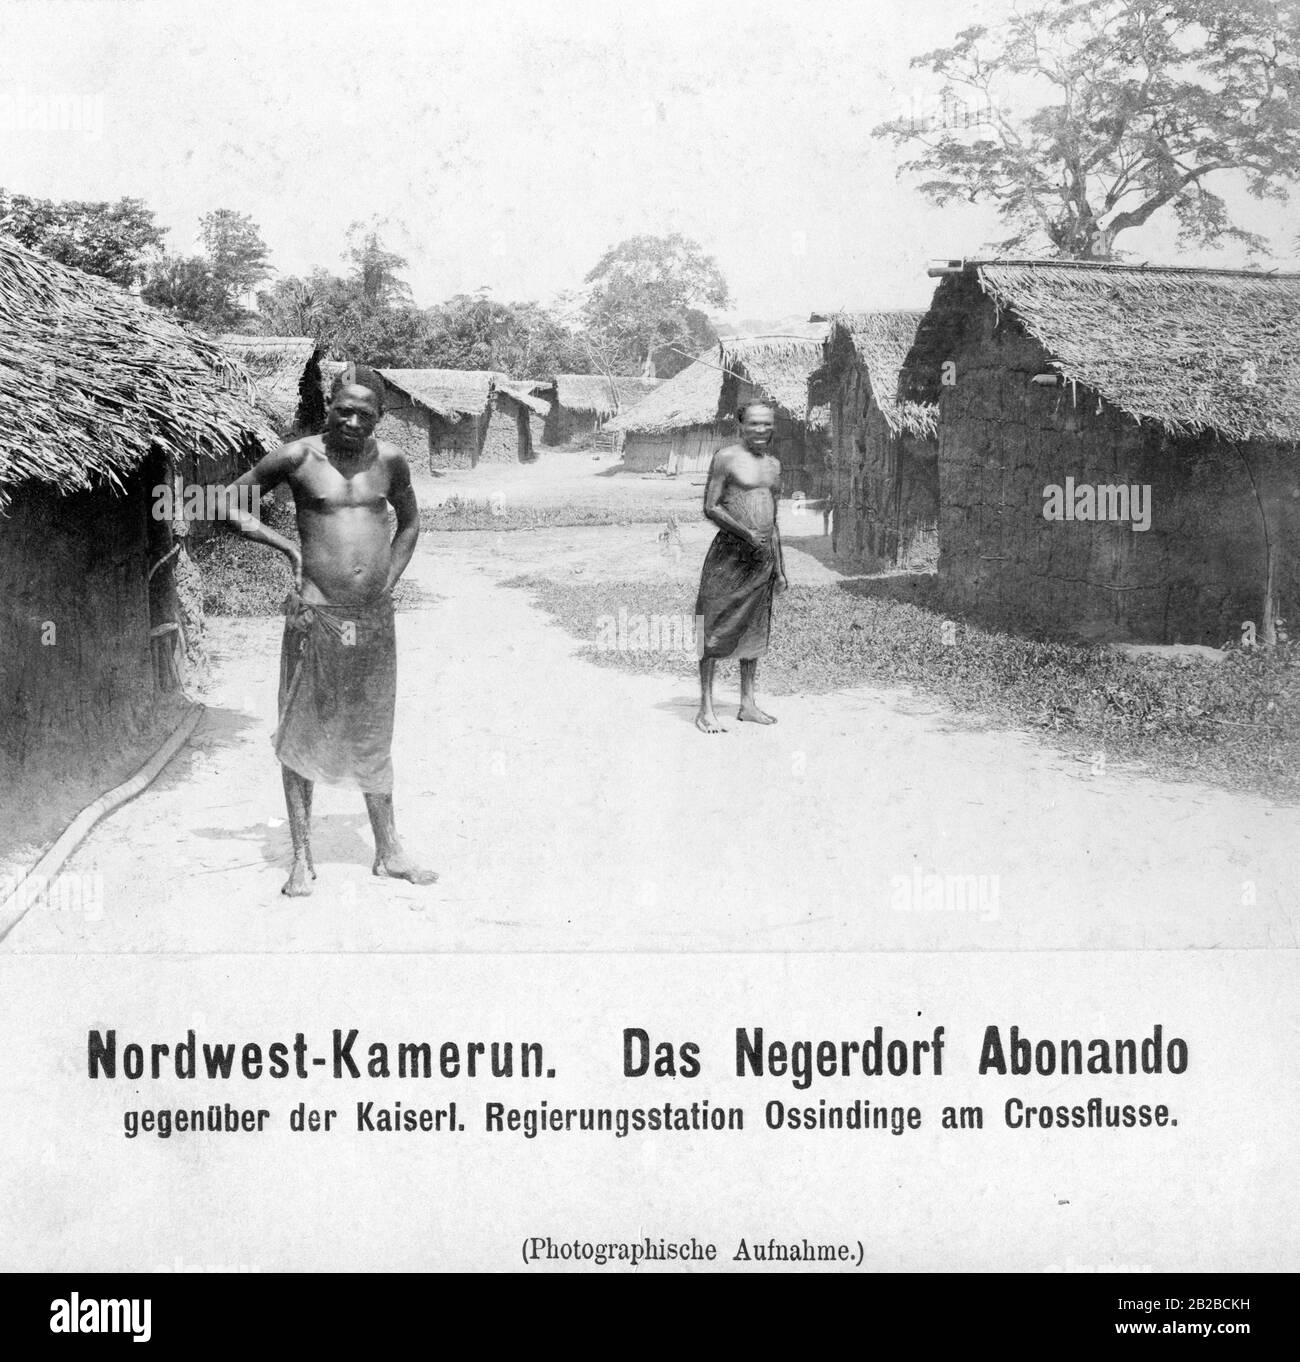 Two locals in the village of Abonando in the German colony of Cameroon. Stock Photo